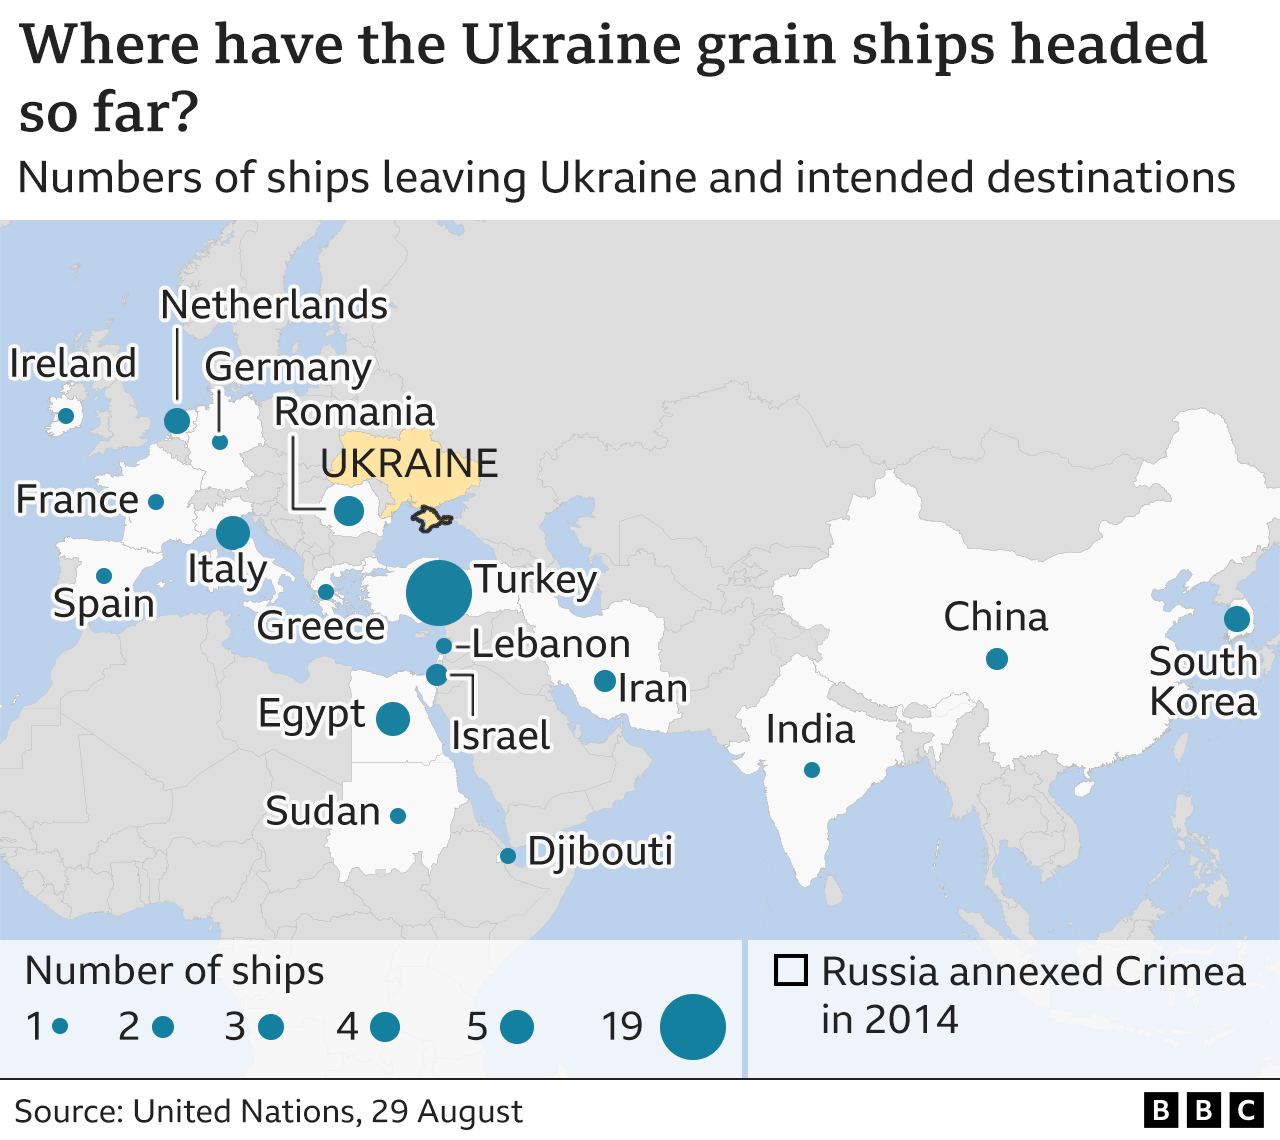 Image shows map of where ships are destined